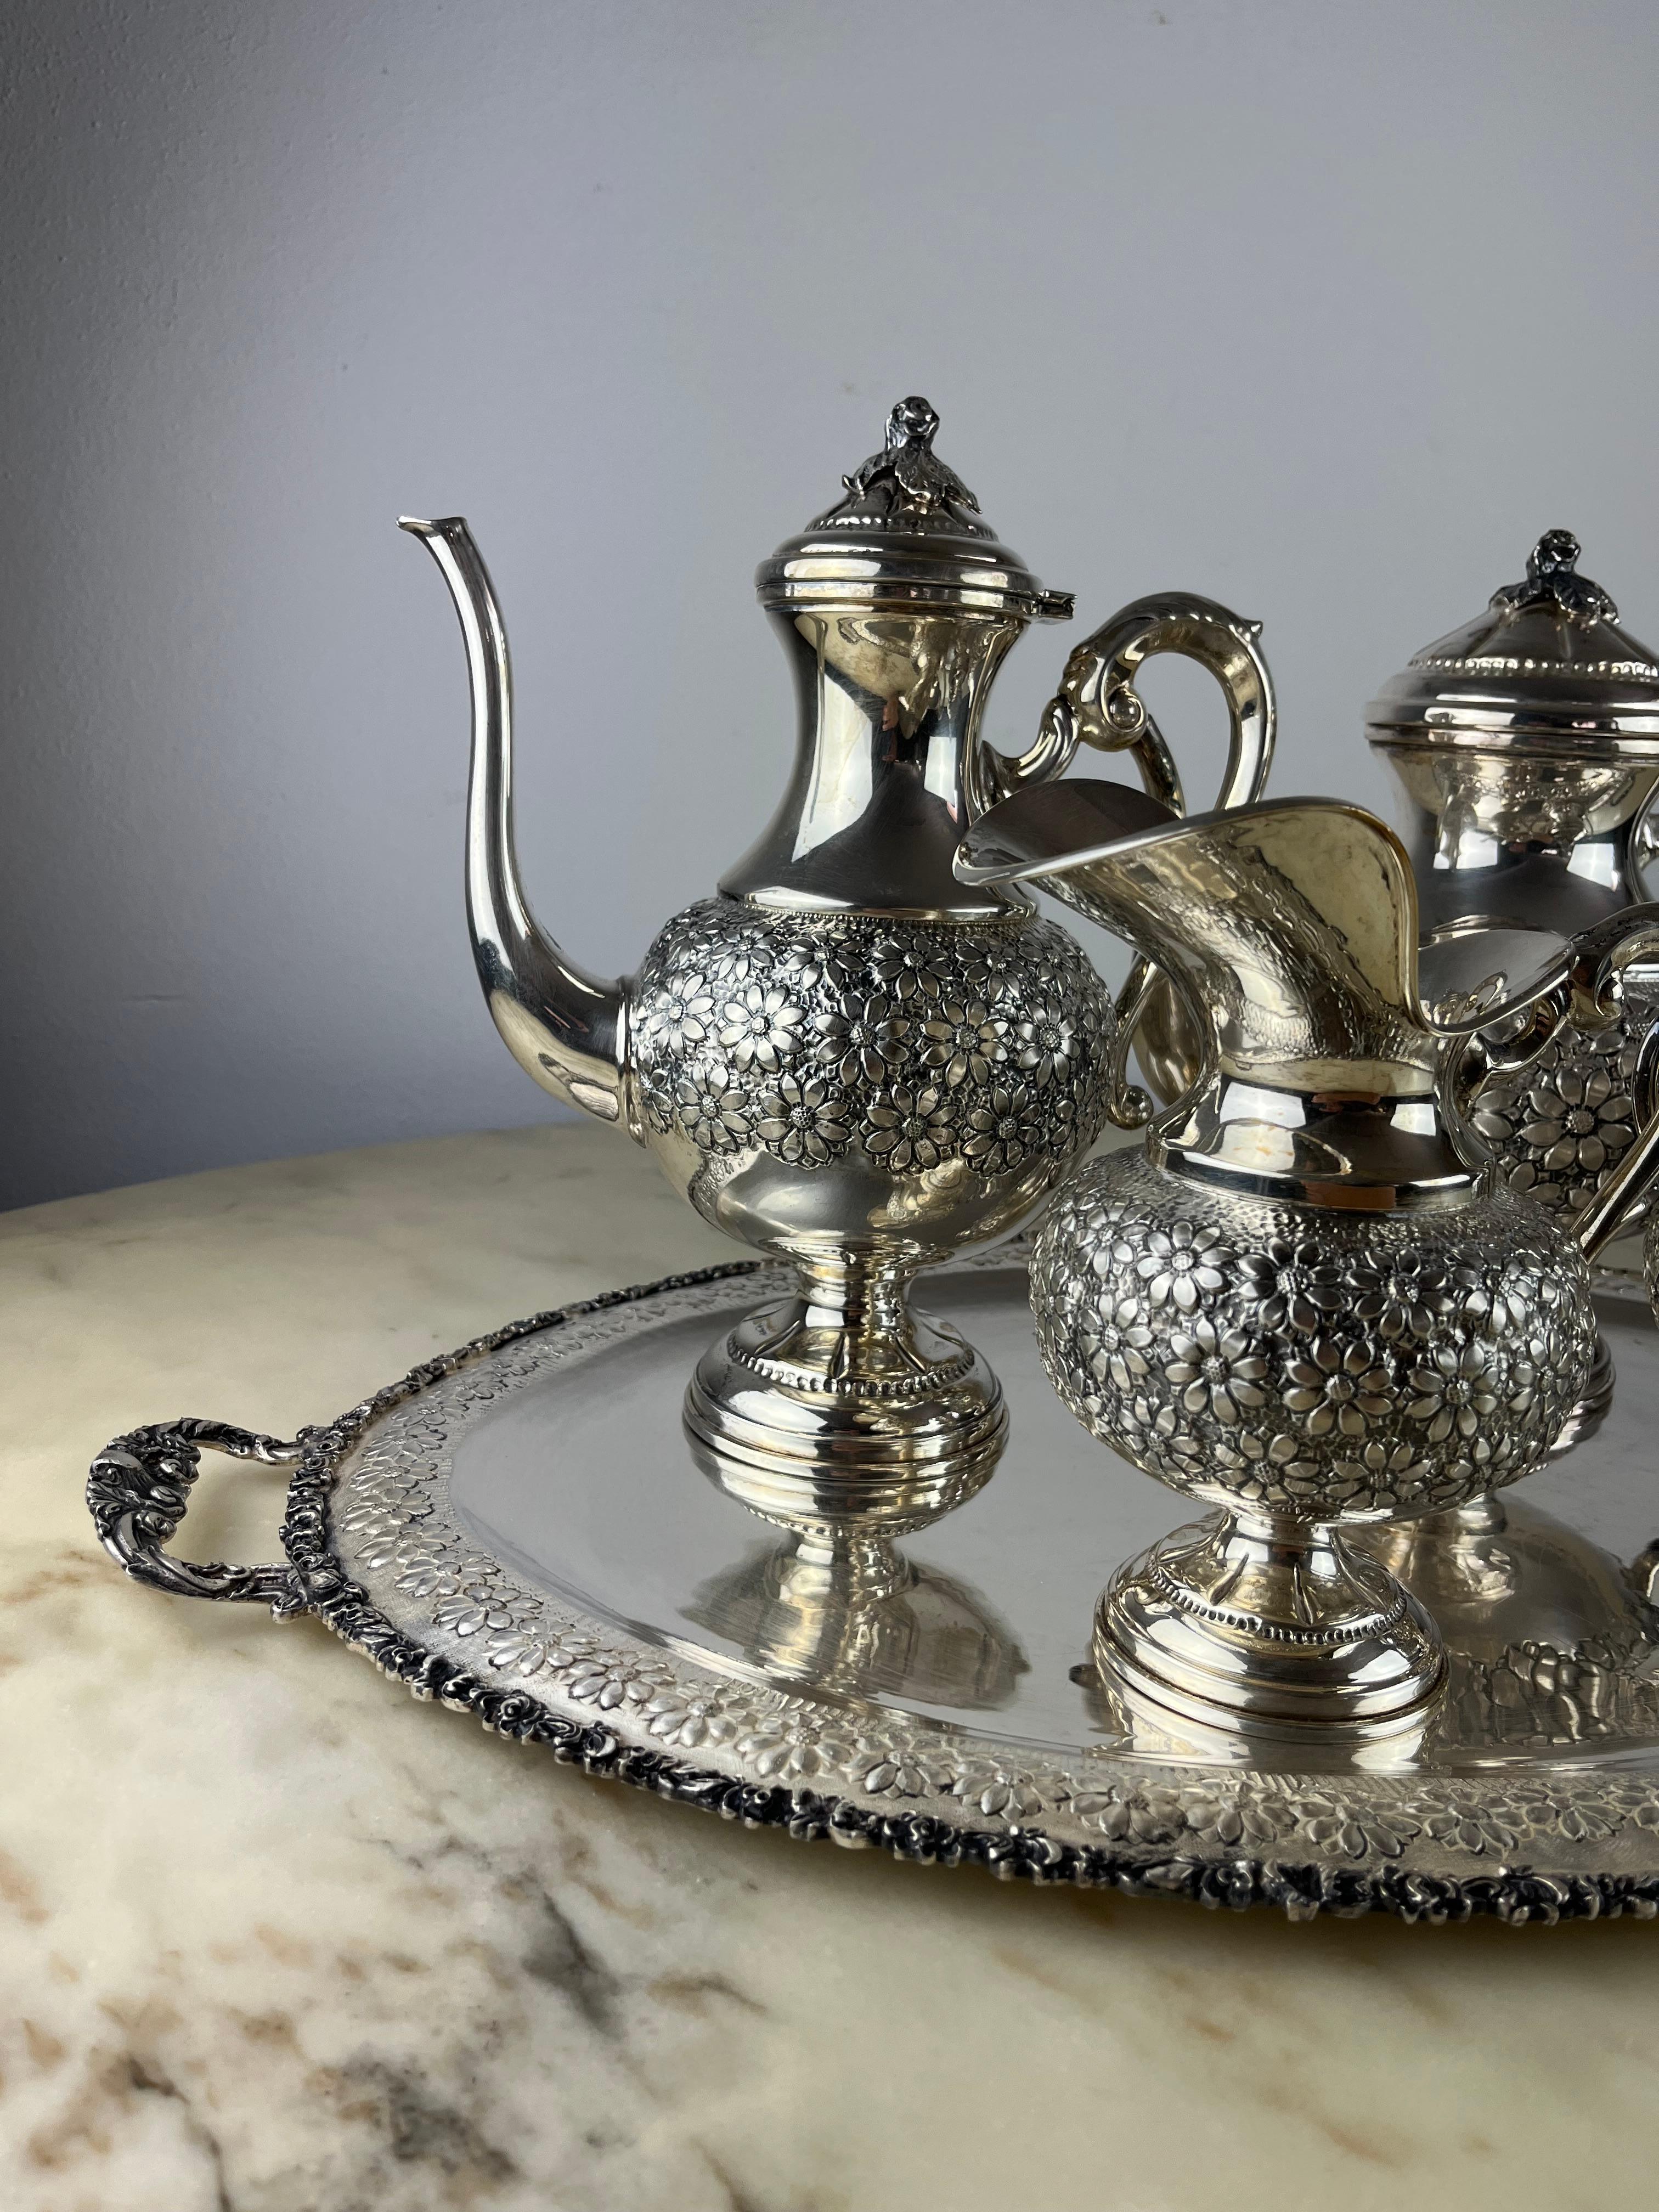 4-piece tea and coffee service plus tray, 800 silver, Italy, 1980s.
Worked entirely by hand, it weighs 4170.00 grams.
It is a very important silver set.
Purchased in the 1980s at the L.A.F.A. of Palermo.
The tray measures 60 cm and weighs 1780